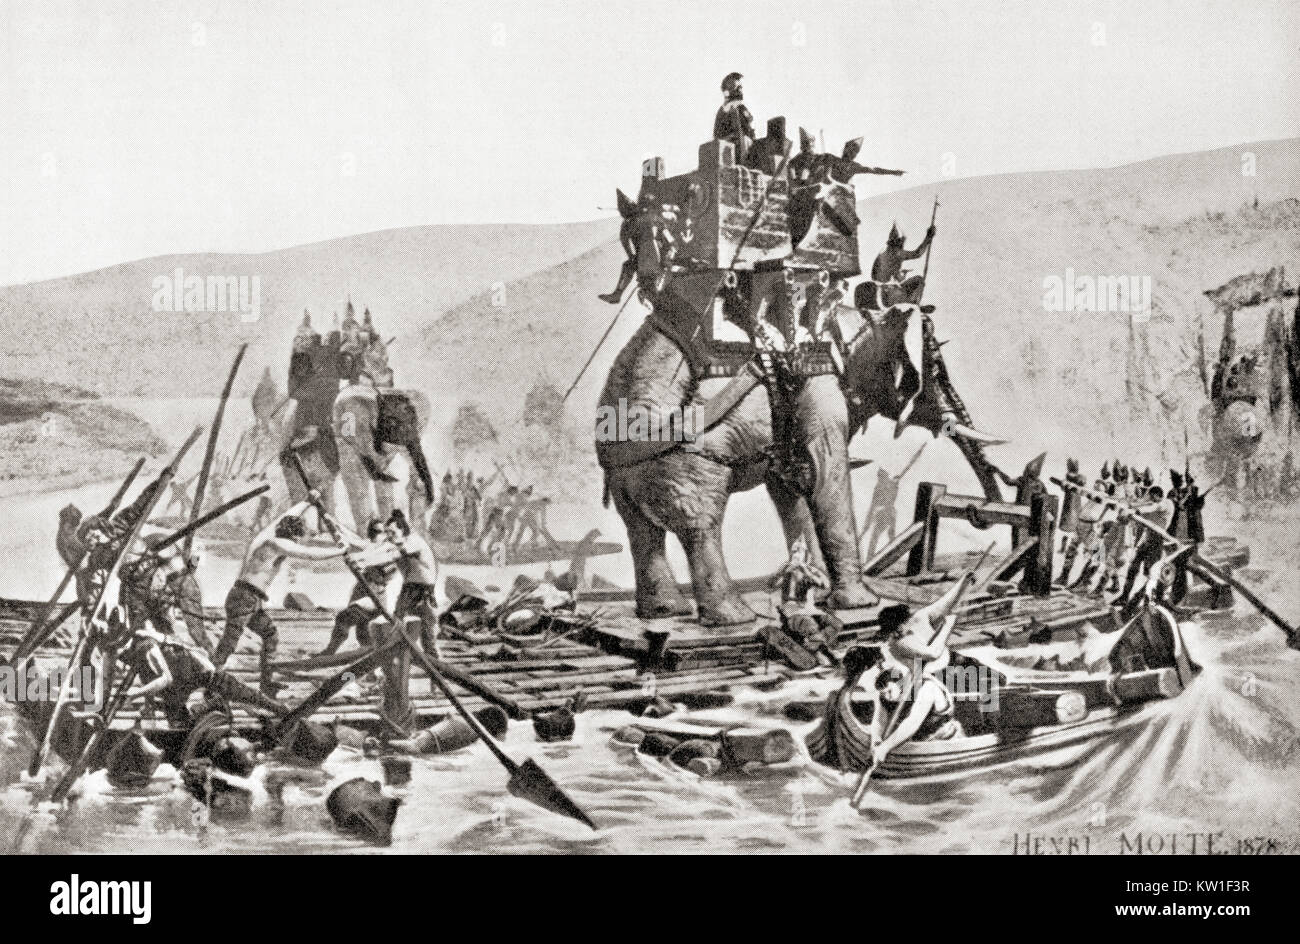 Hannibal's army crossing the Rhône in 218BC, seen here using rafts of wood to float his elephants and soldiers across the river. Hannibal Barca,247 –183/181 BC.  Carthaginian general.   From Hutchinson's History of the Nations, published 1915. Stock Photo